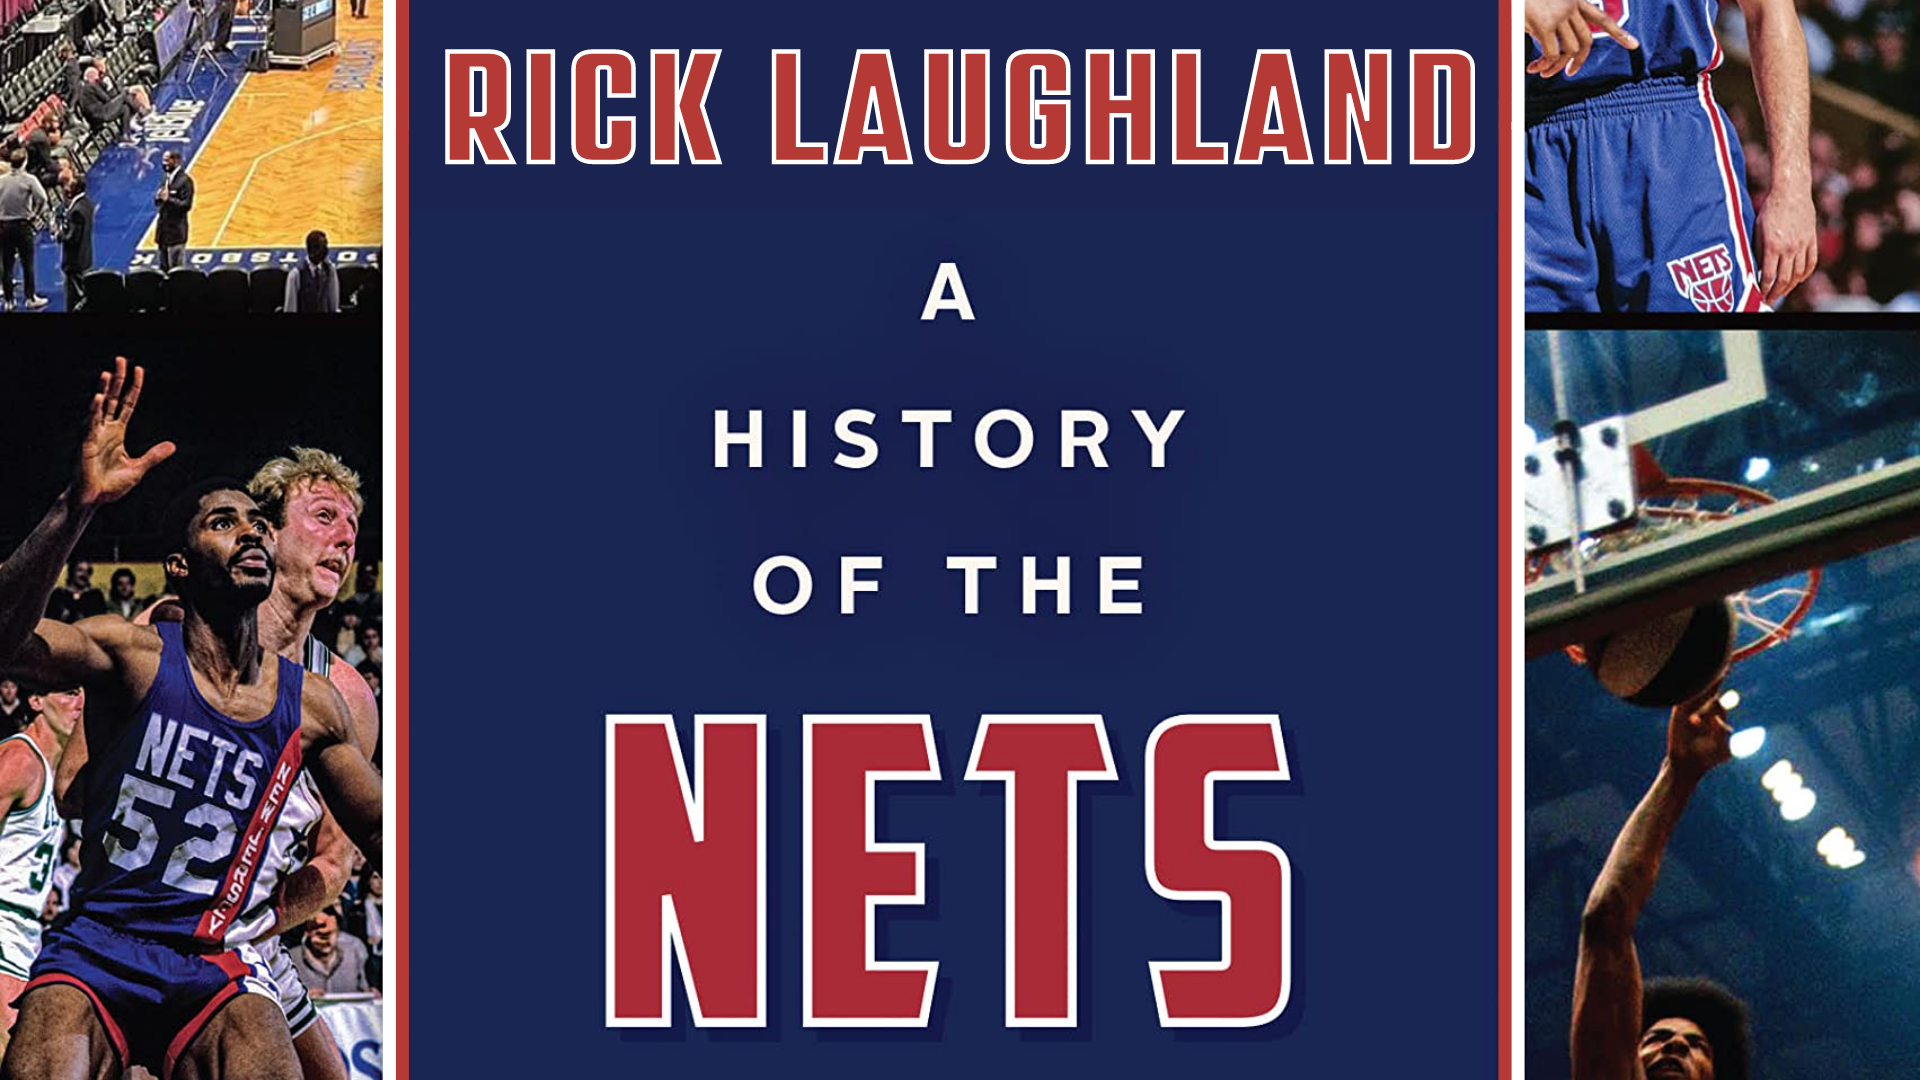 Rick Laughland A History of the Nets